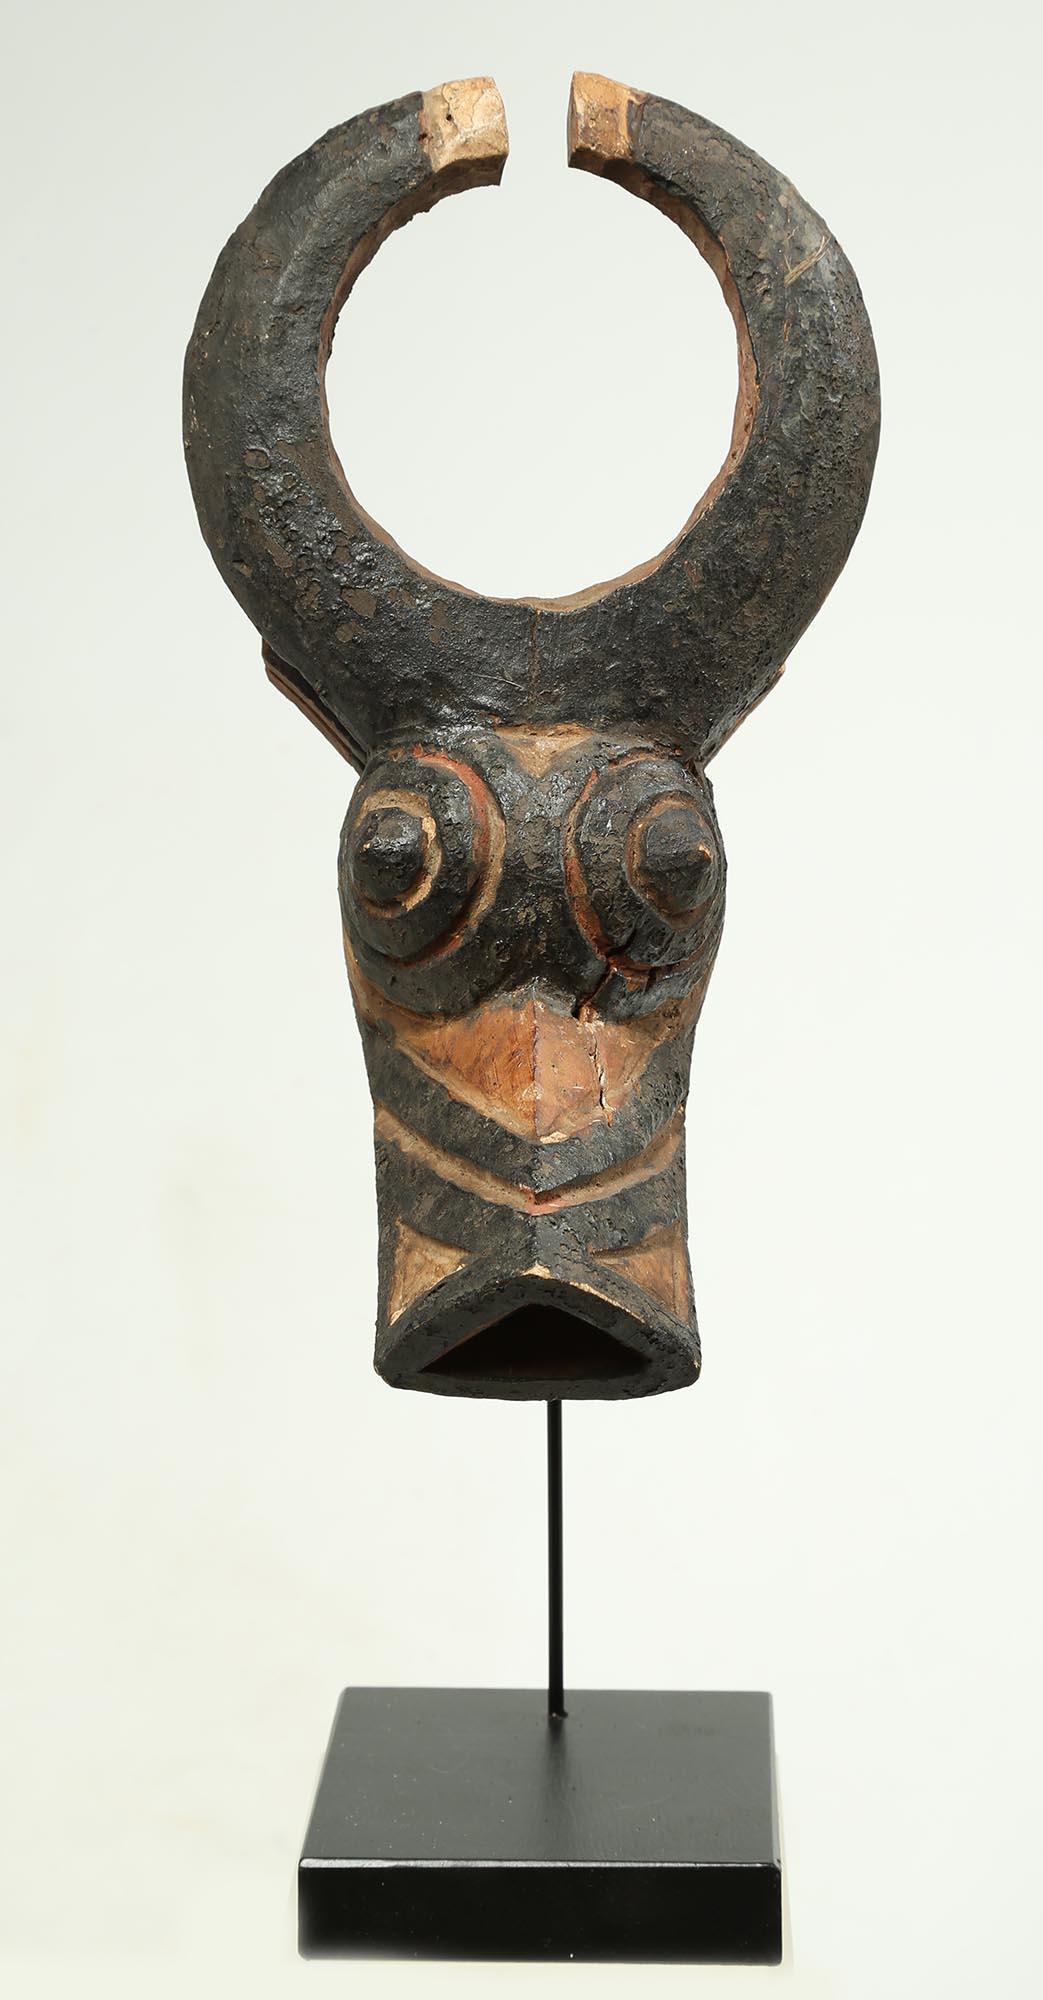 An appealing, contented-looking bush-cow mask with circular horns at the top. From the Bwa people Burkina Faso, early 20th century, Africa. Nicely balanced, symmetrical geometric forms and fine painting in black on softened white.
On custom wood